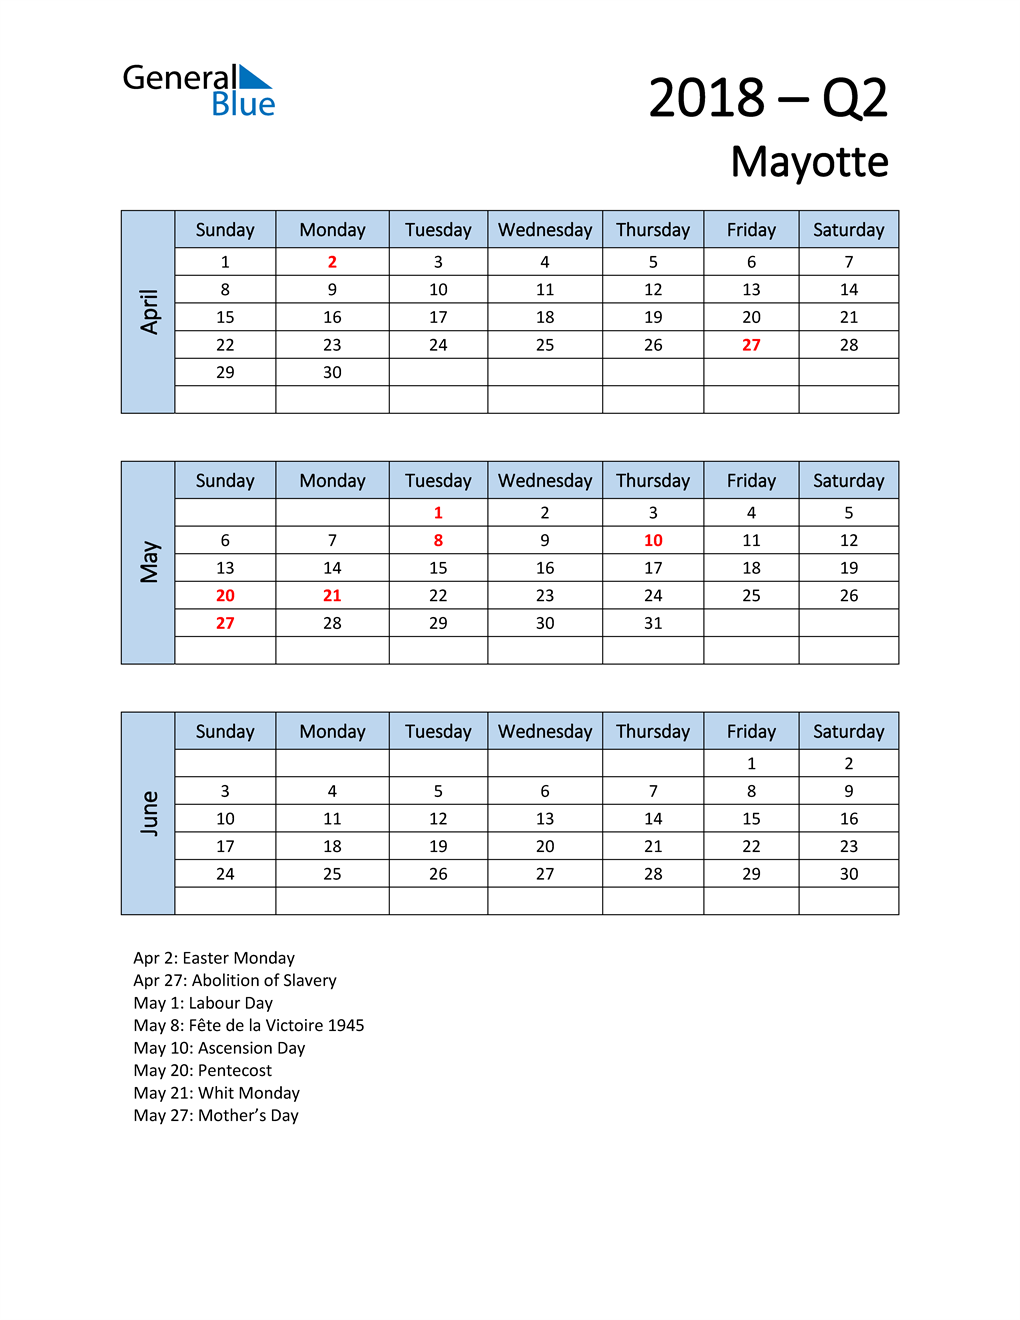  Free Q2 2018 Calendar for Mayotte